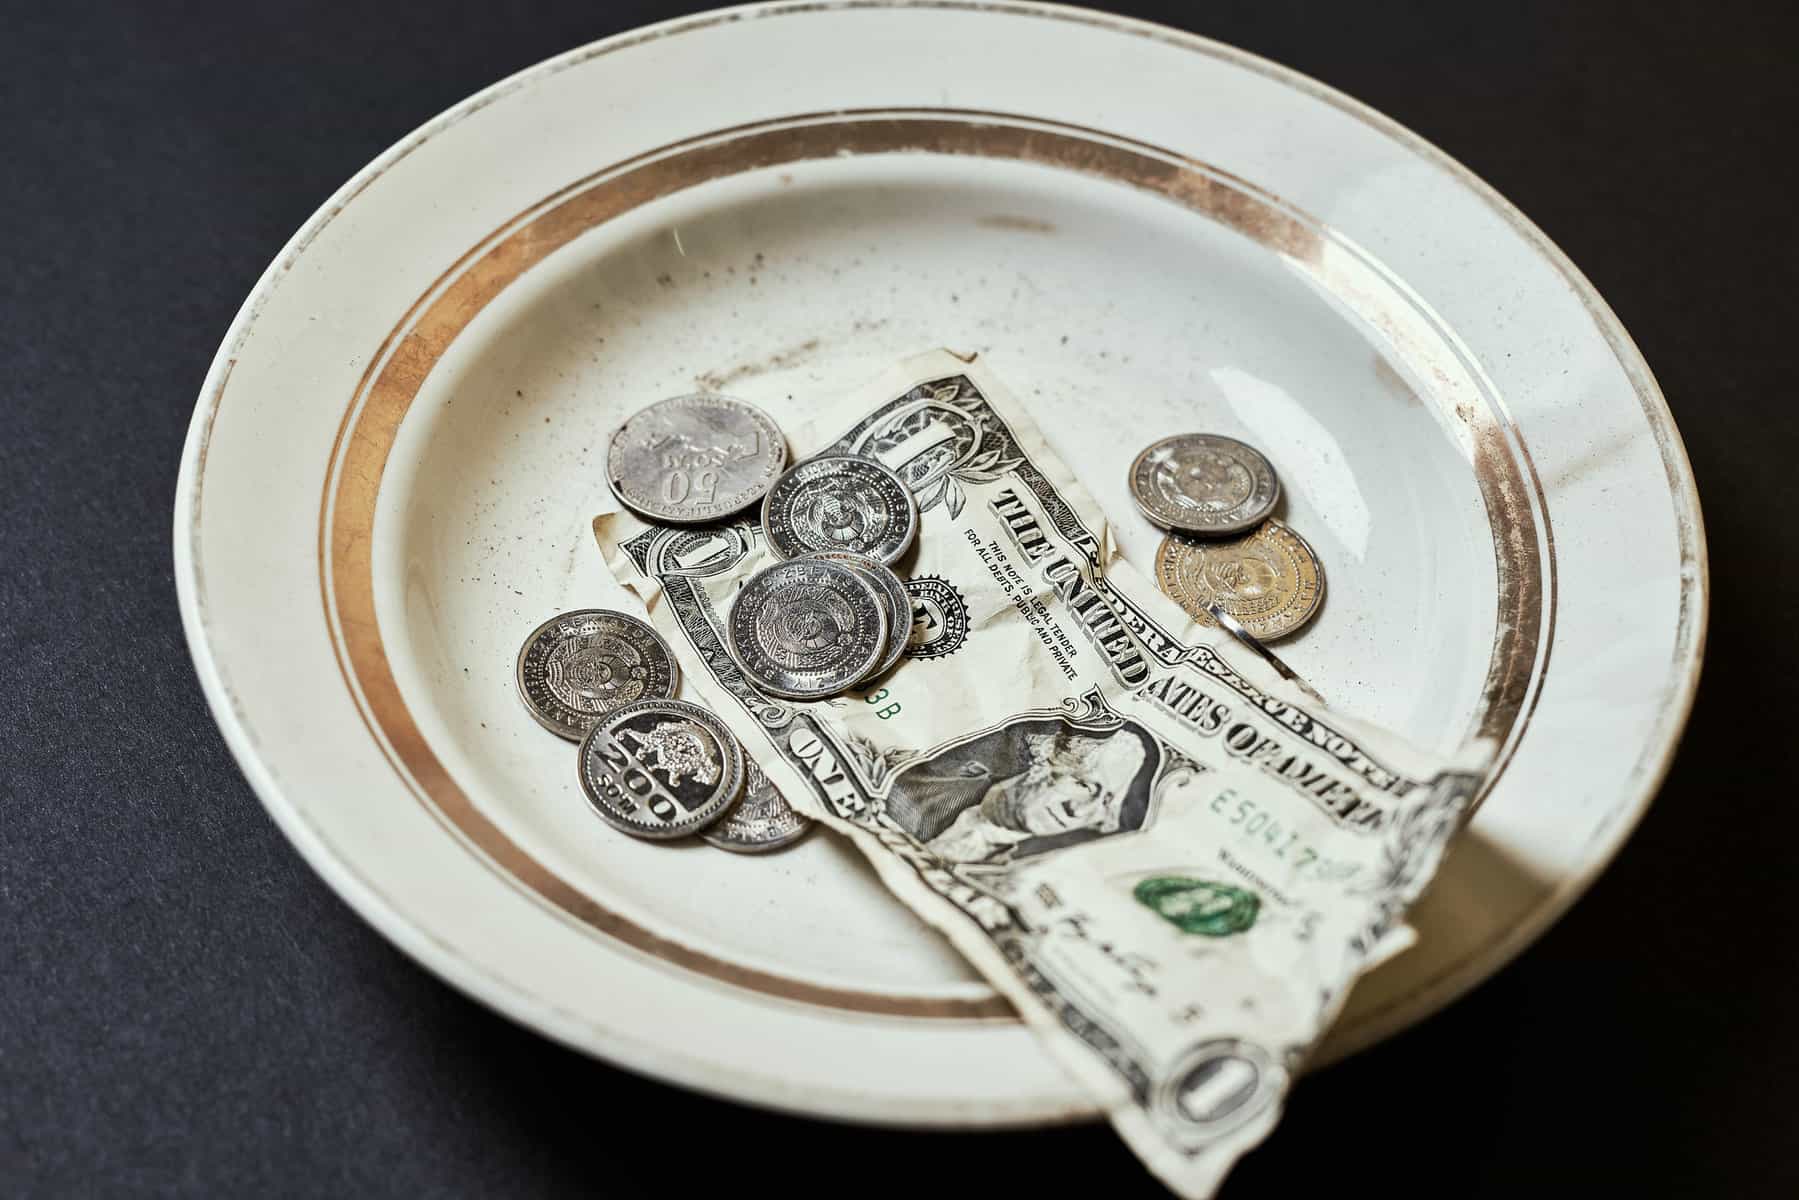 An old off white plate with worn gold around the edges holds donated money in coins and a bill.